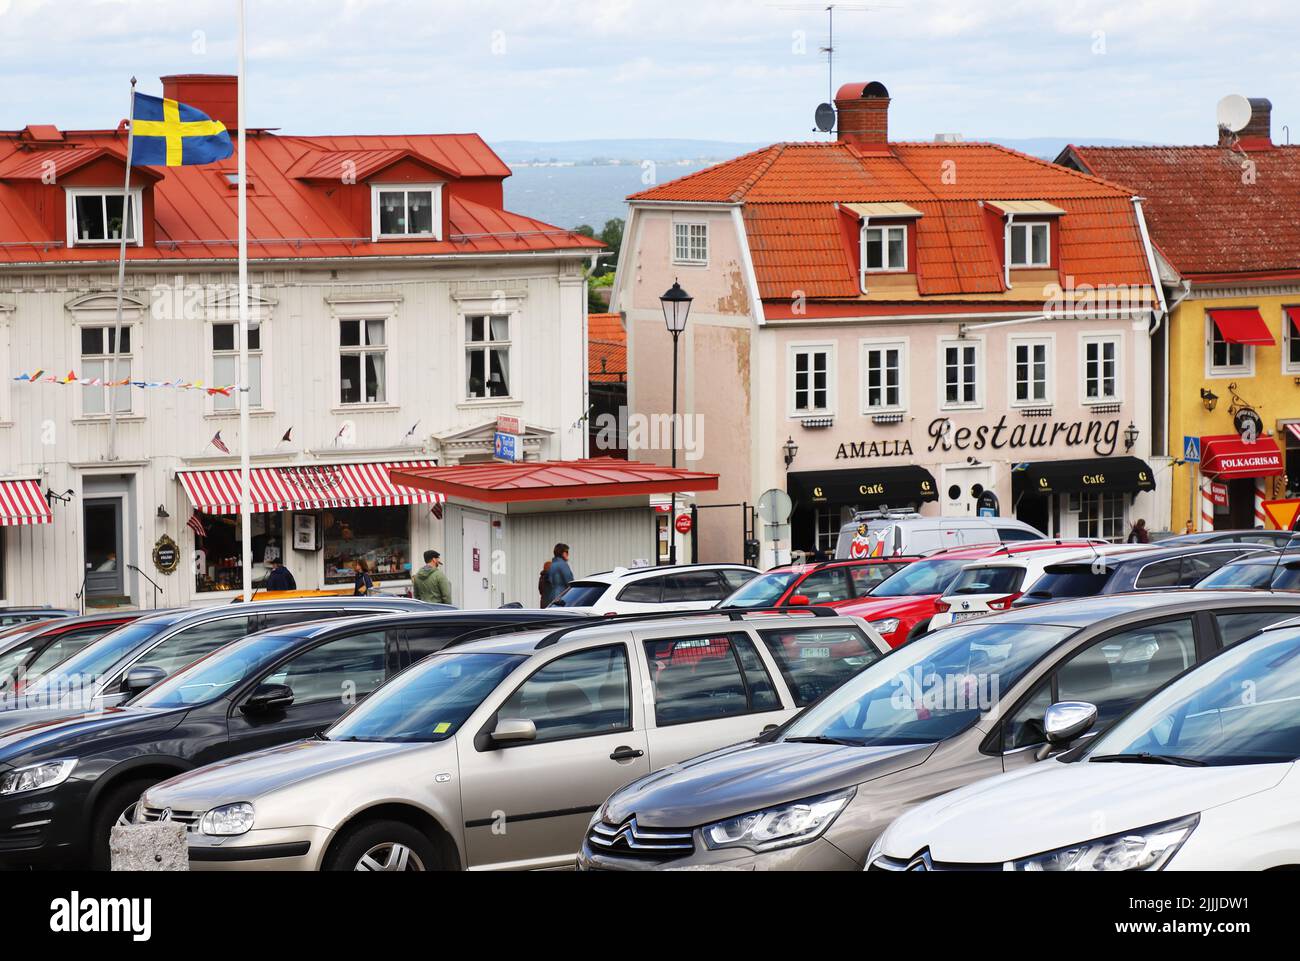 Granna, Sweden - July 6, 2020: Car park at the town square. Stock Photo